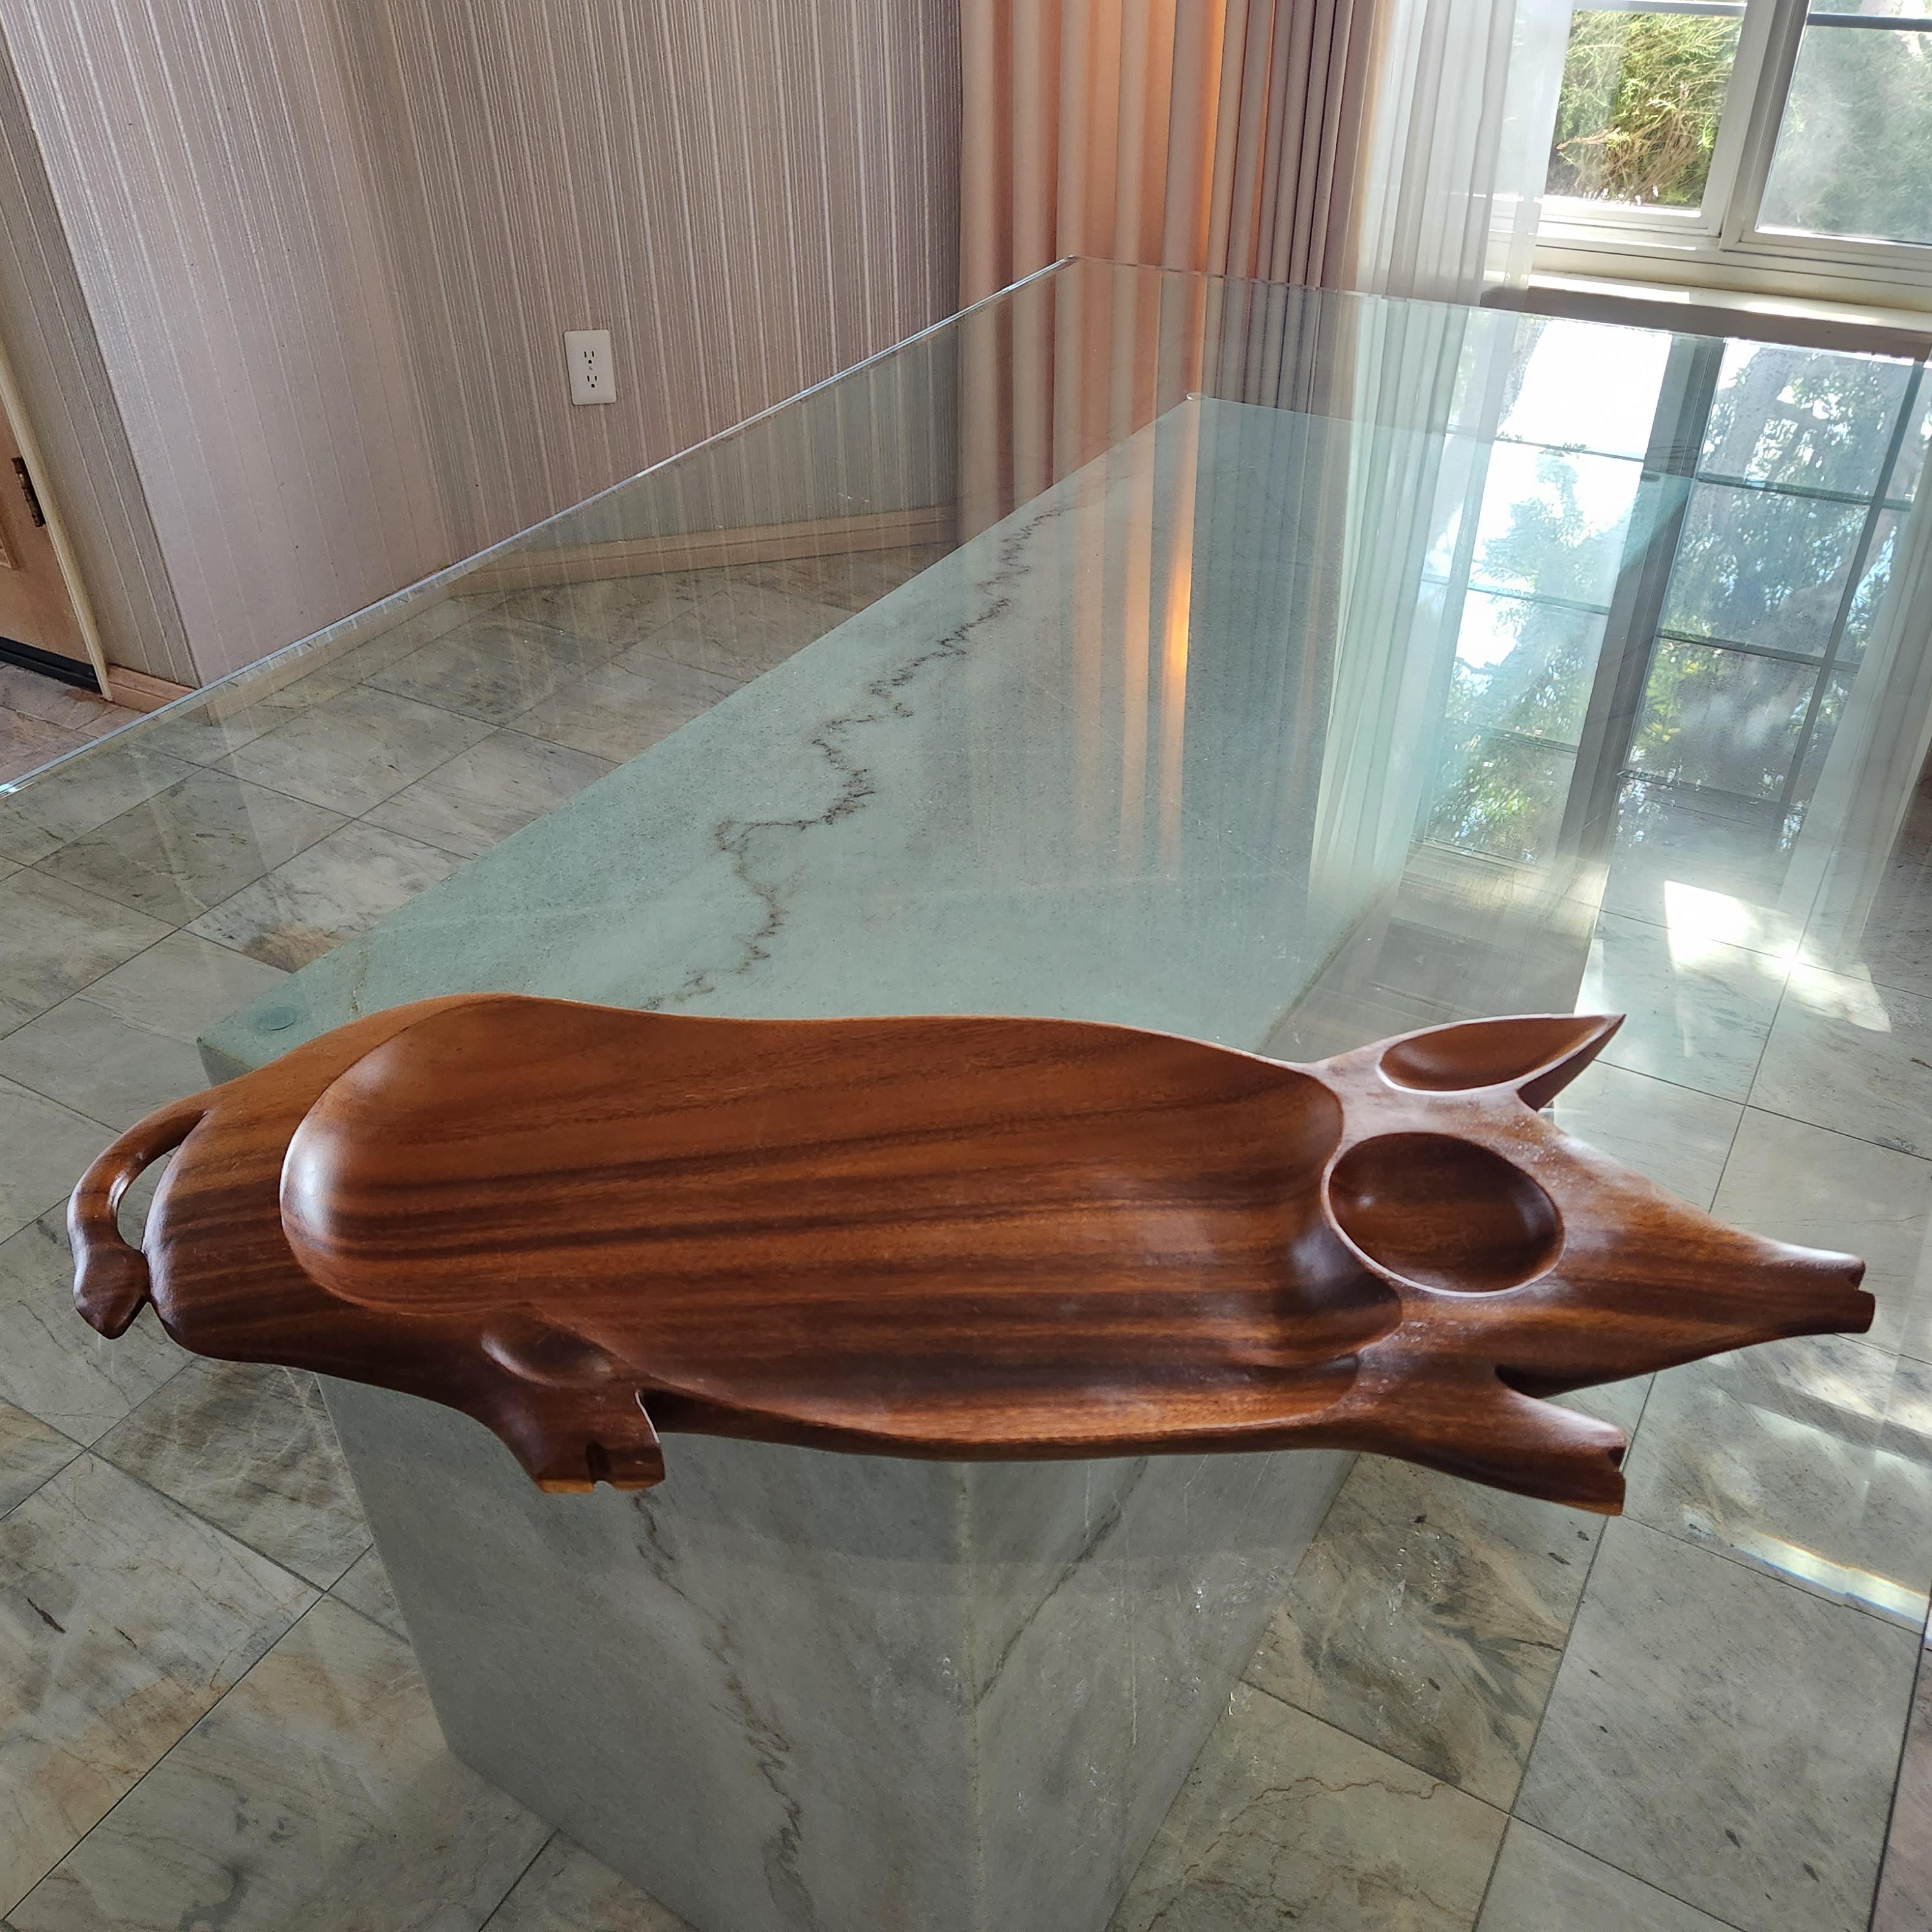 1970s Modern Pig Pupu Party Platter Serving Tray Wood Charcuterie Board 7